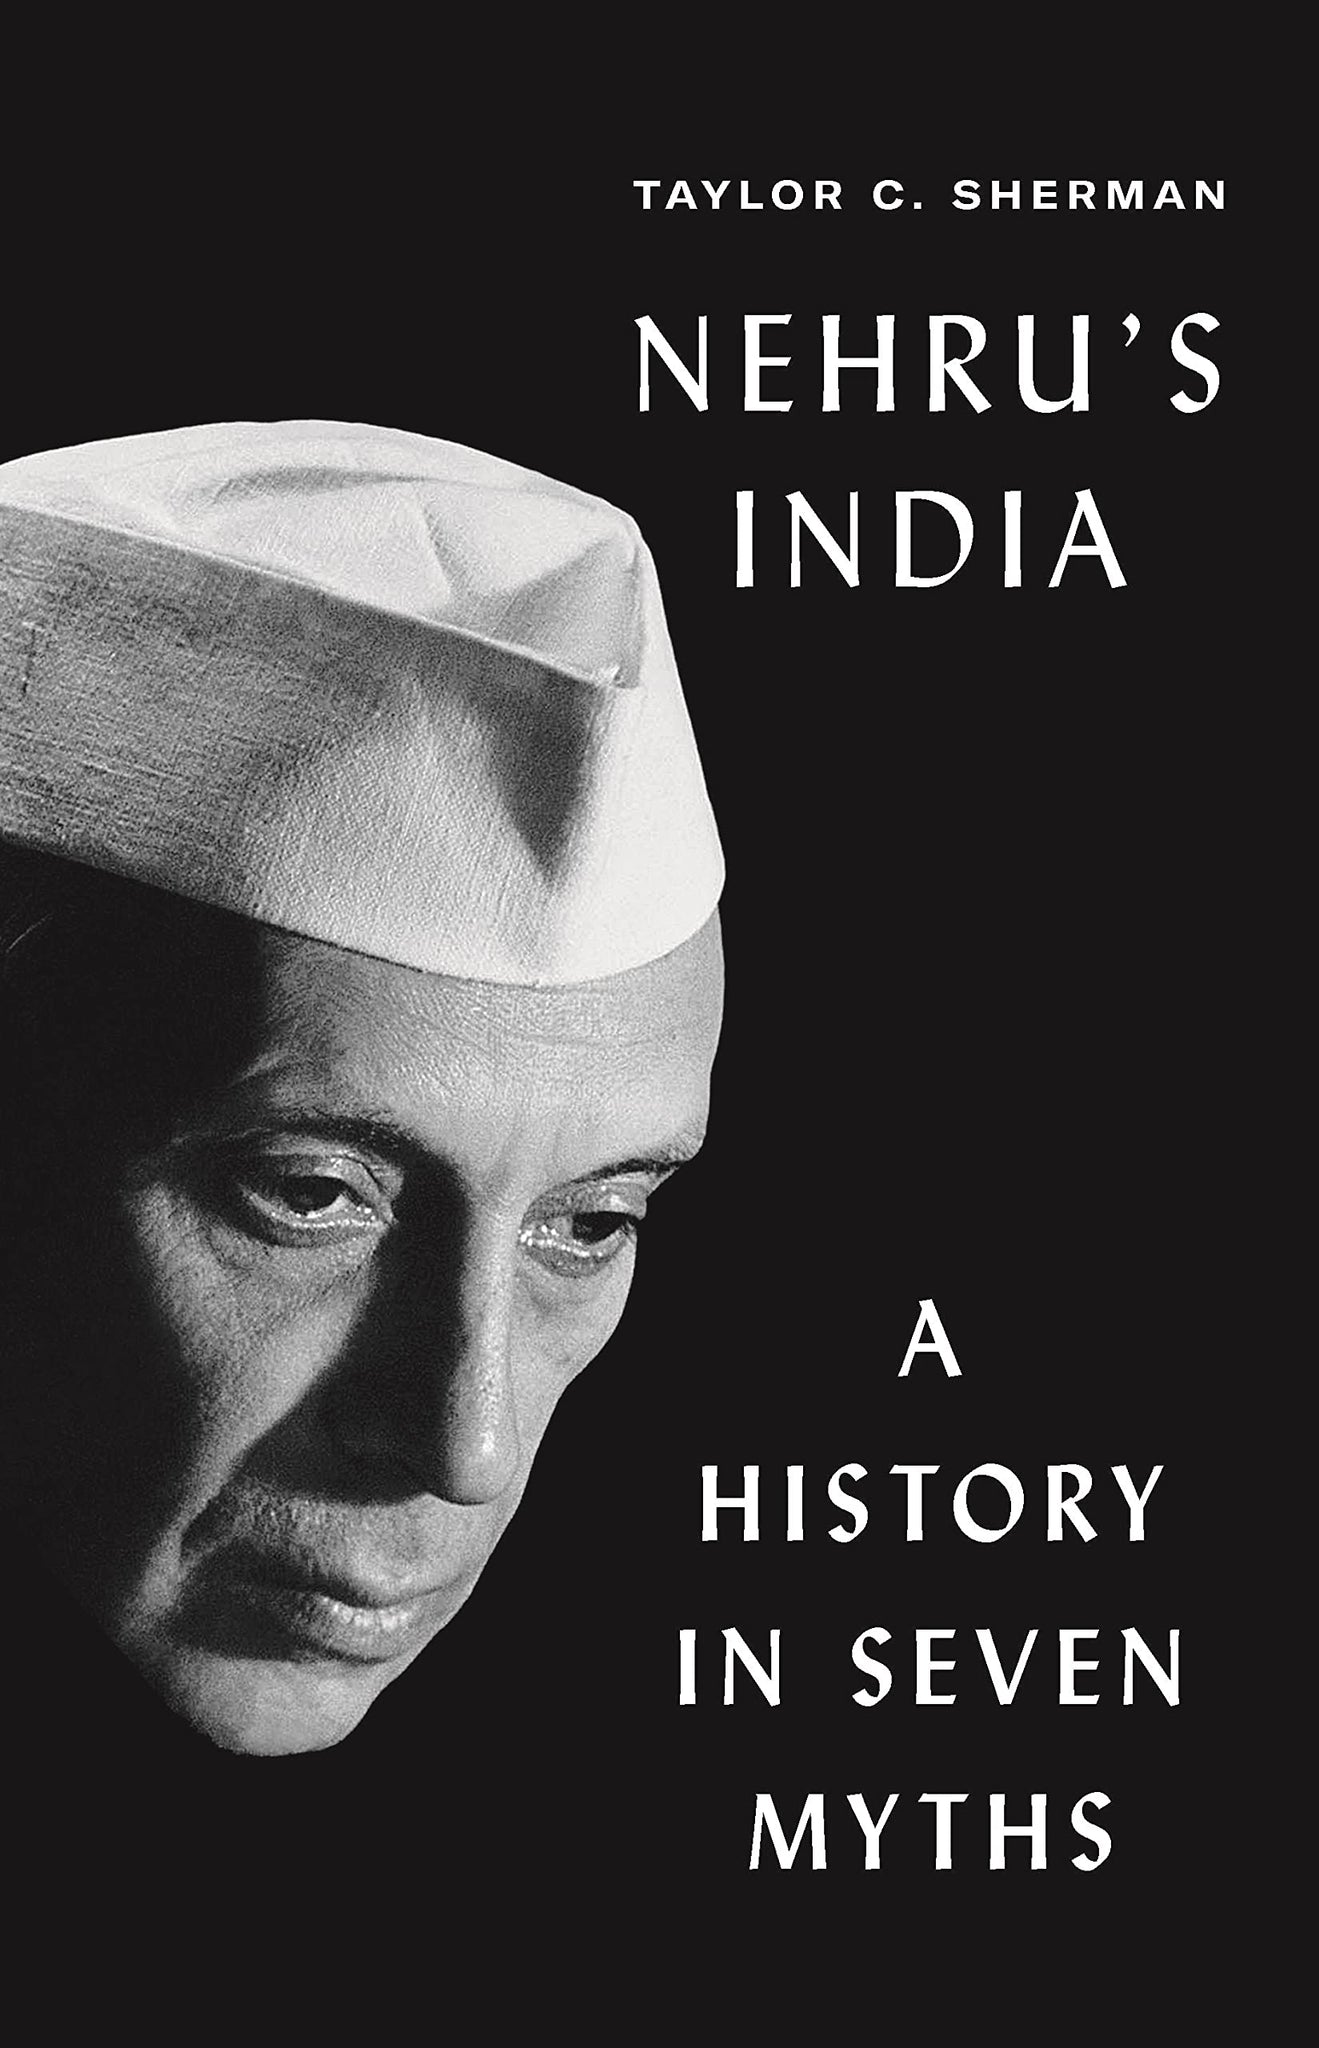 Nehru's India: A History In Seven Myths